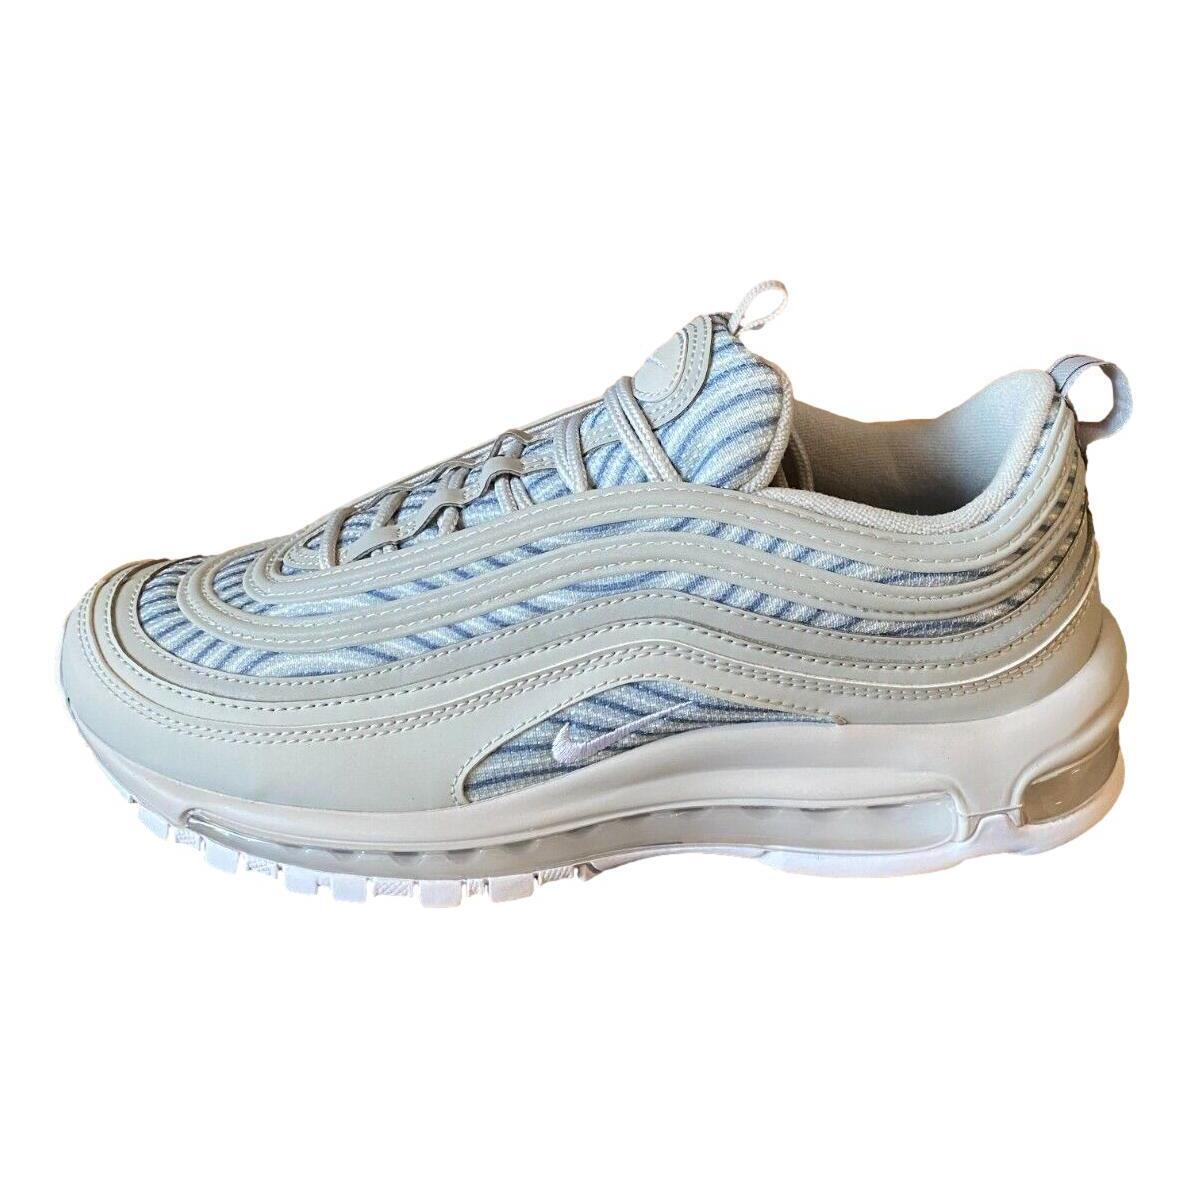 Nike ID By You Women`s Air Max 97 Shoes Sneakers Grey/blue DJ3180-991